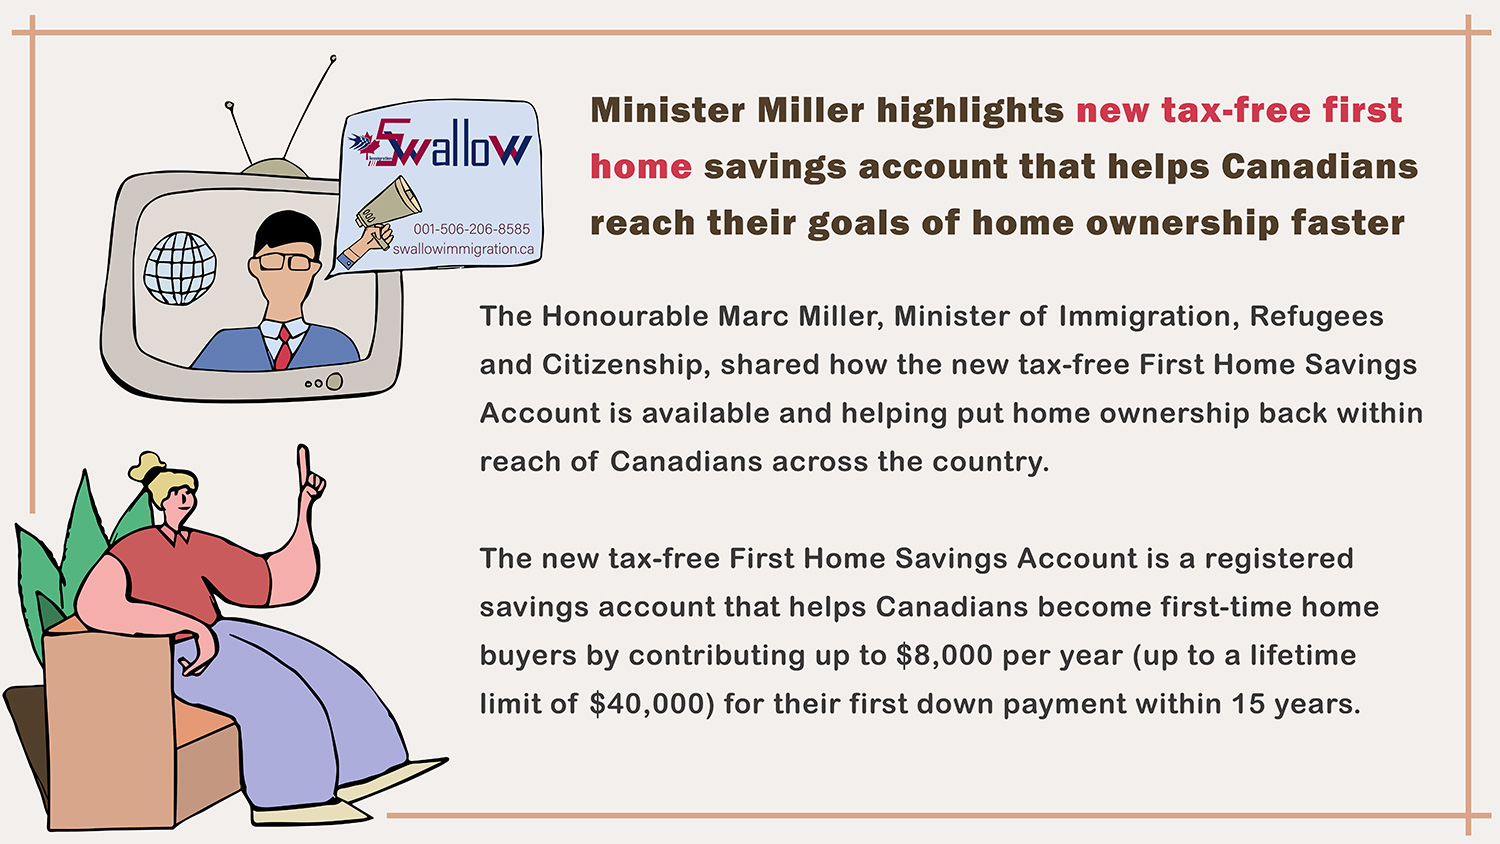 Minister Miller highlights new tax-free first home savings account that helps Canadians reach their goals of home ownership faster